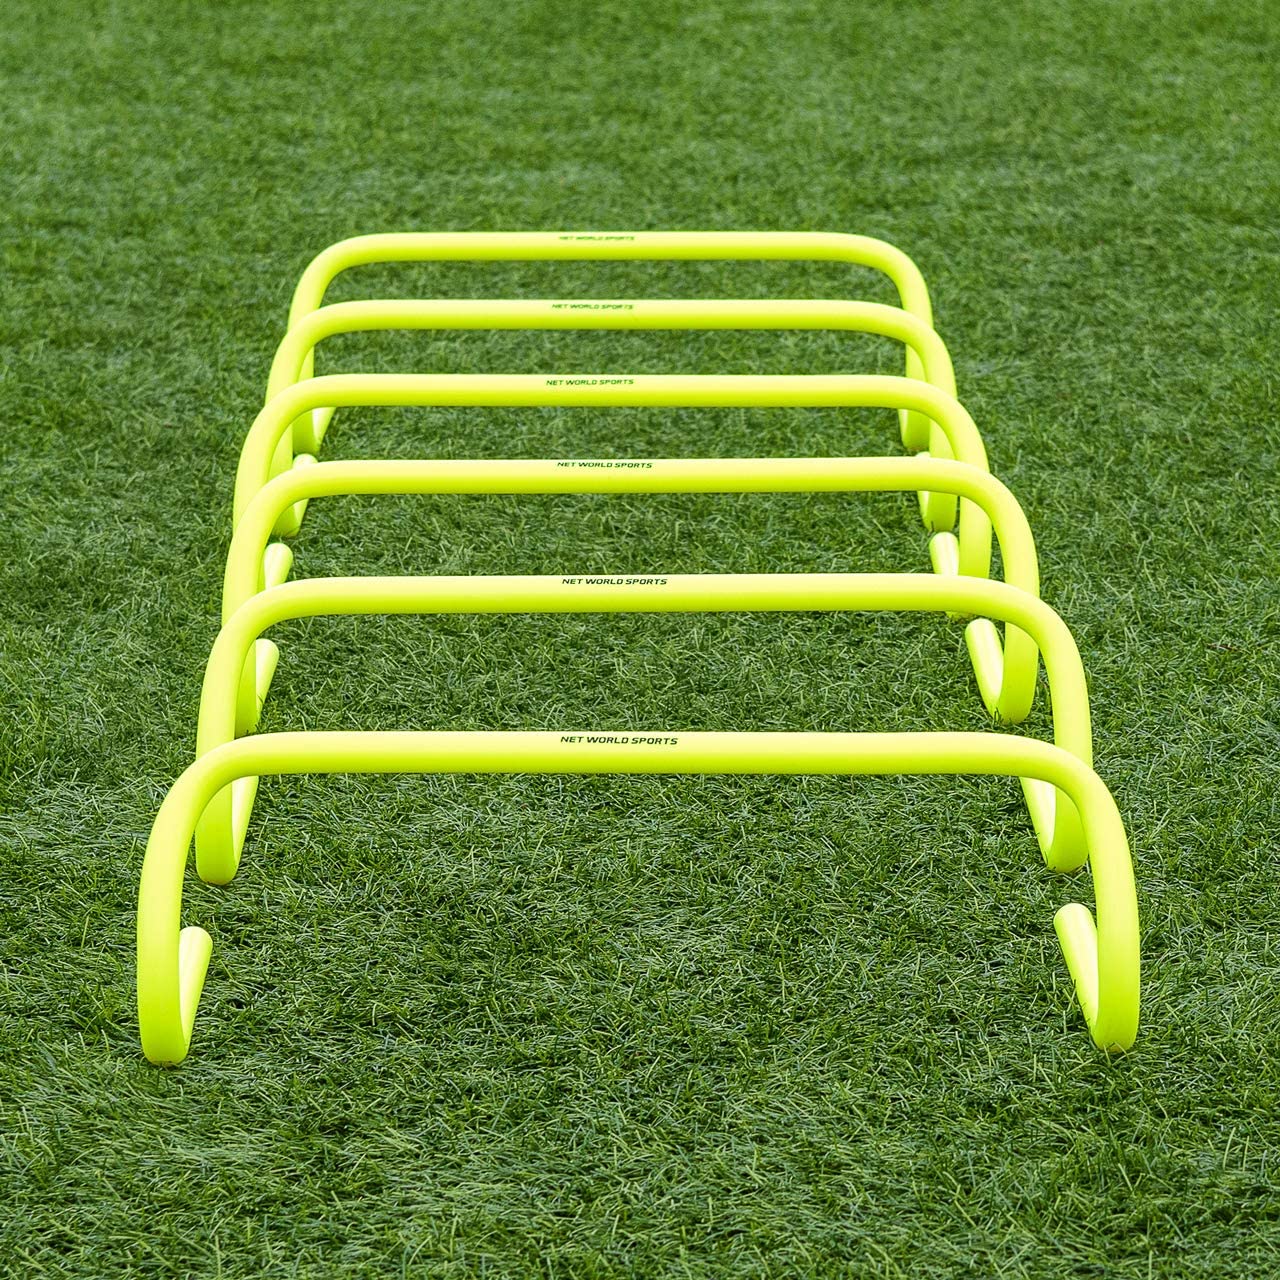 Agility Training Hurdles, 5-Pack - Hi Visibility Speed Endurance Indoor/Outdoor Practice Equipment for Track & Field - Fences for Sports Team Condition & Coaching Football, Soccer, Cross Country - applecome